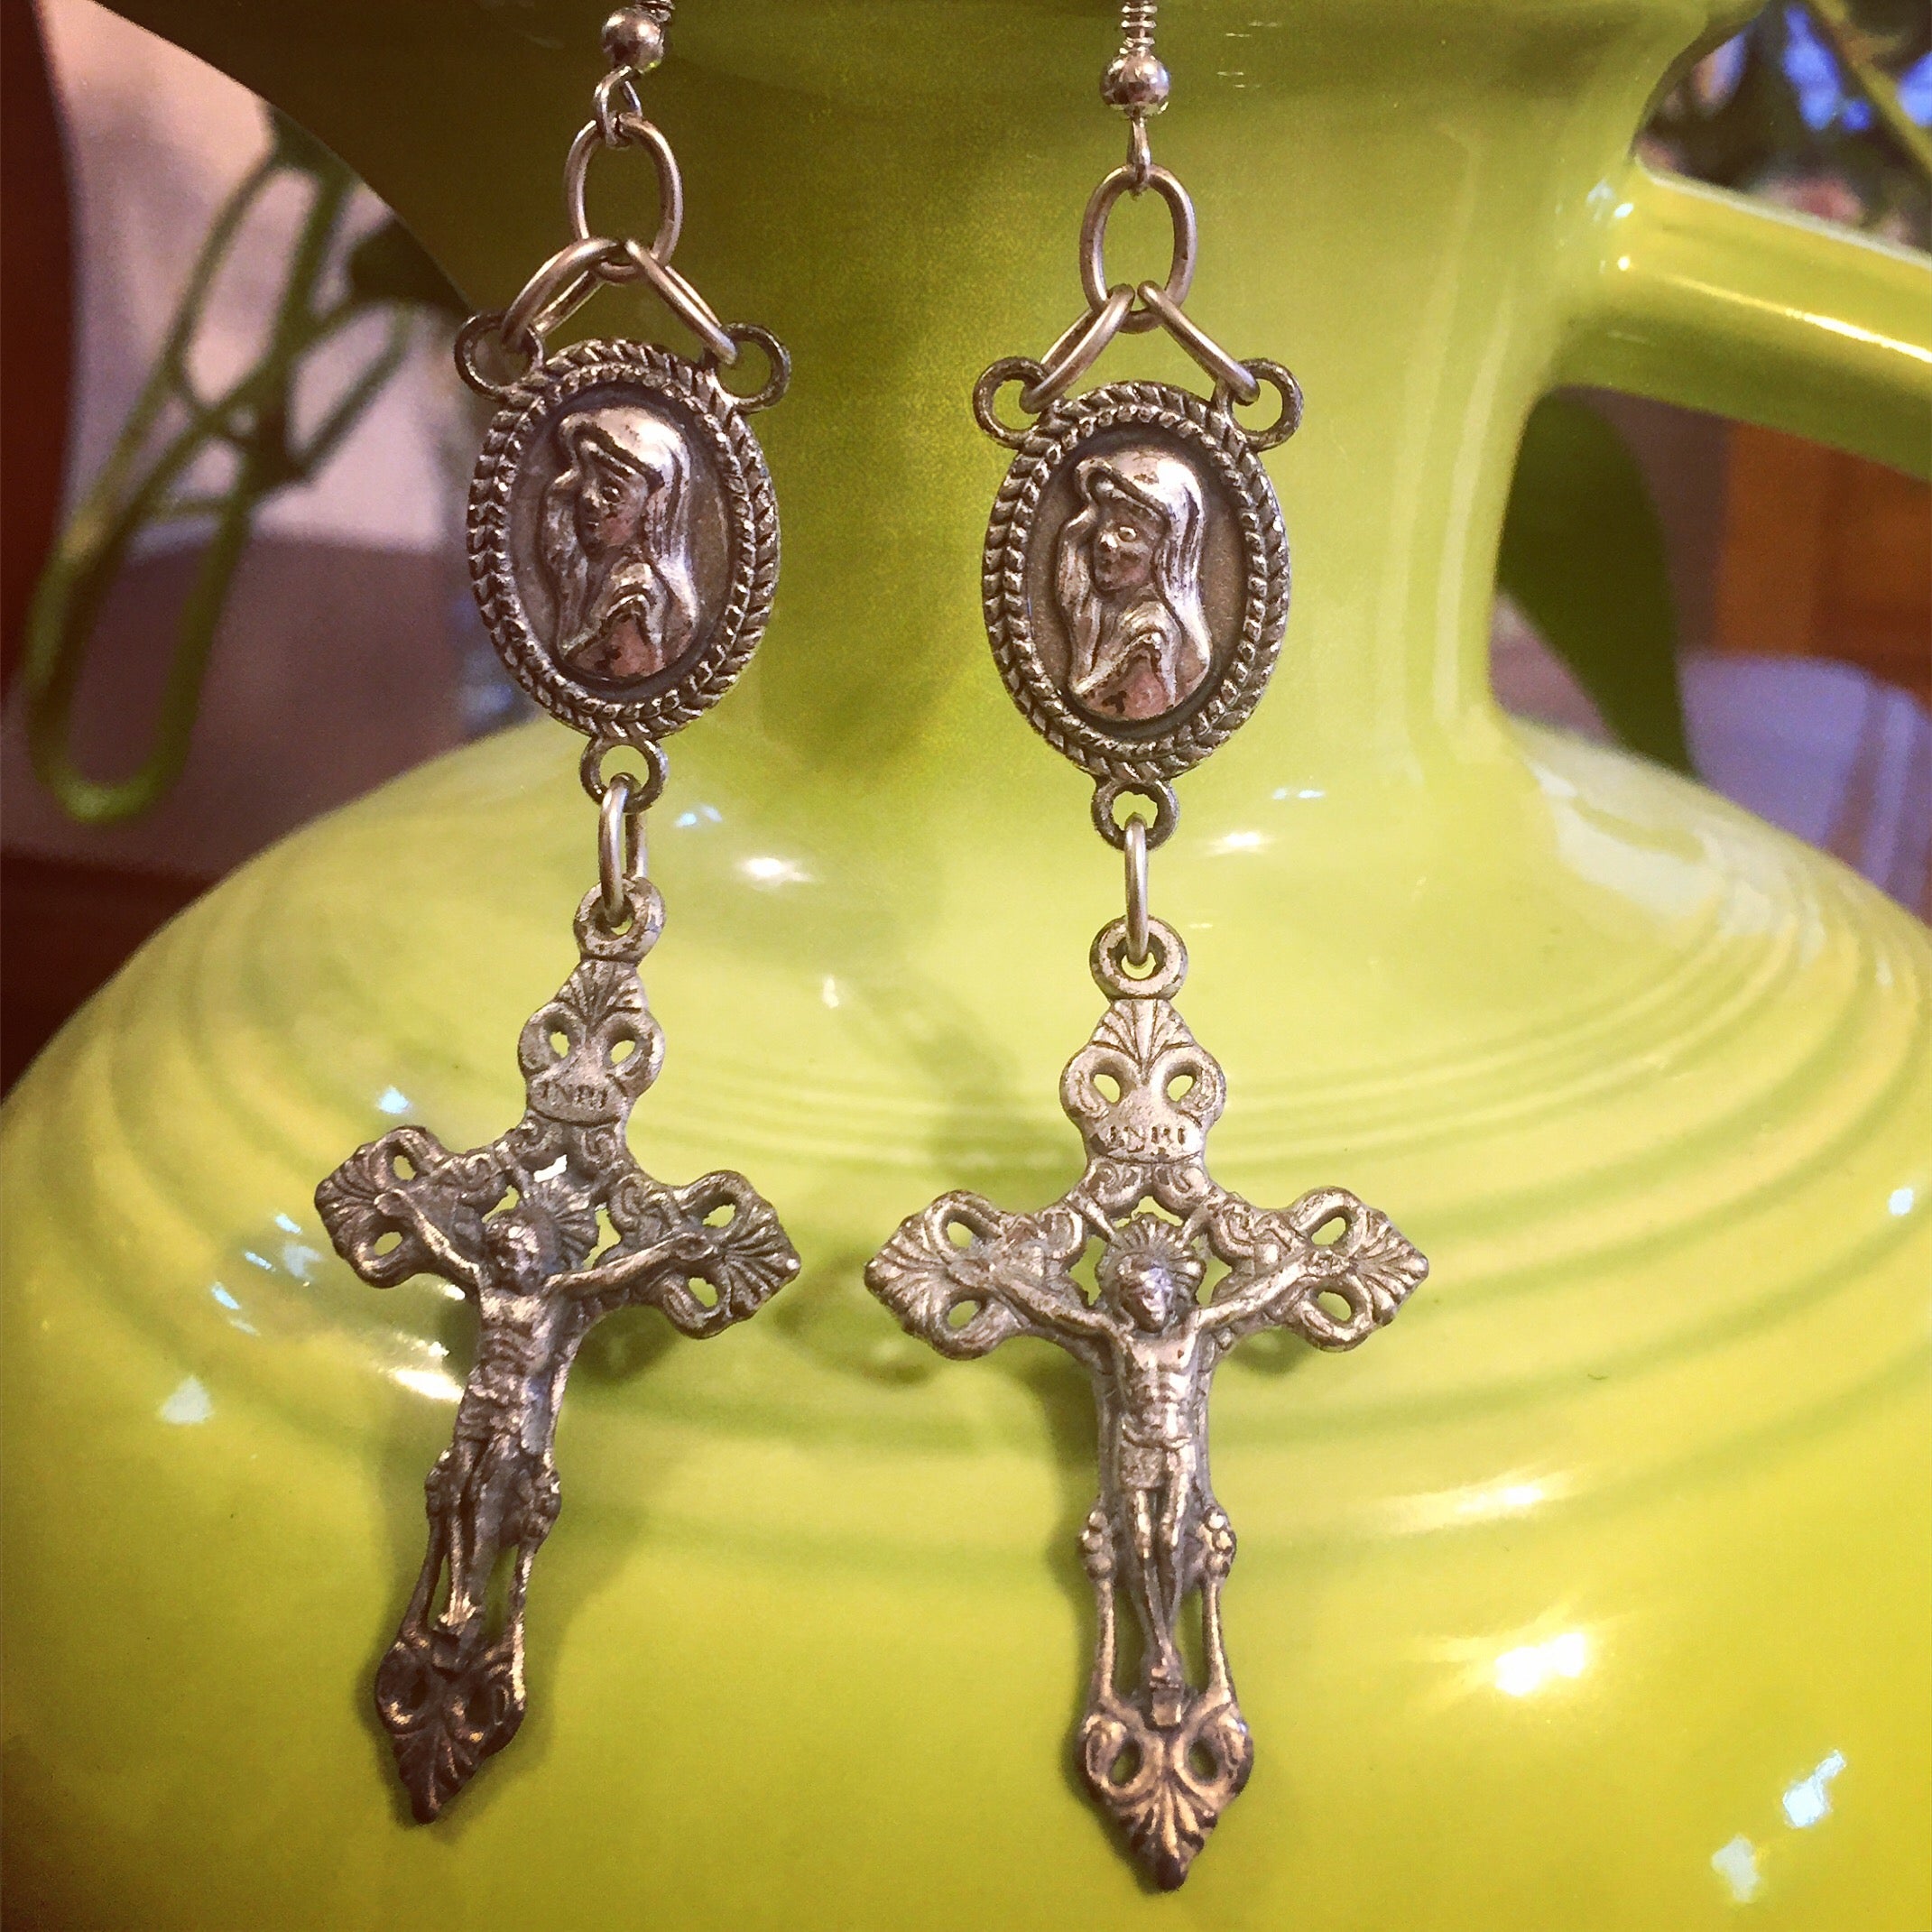 Crucifix Earrings with Mary Medallions